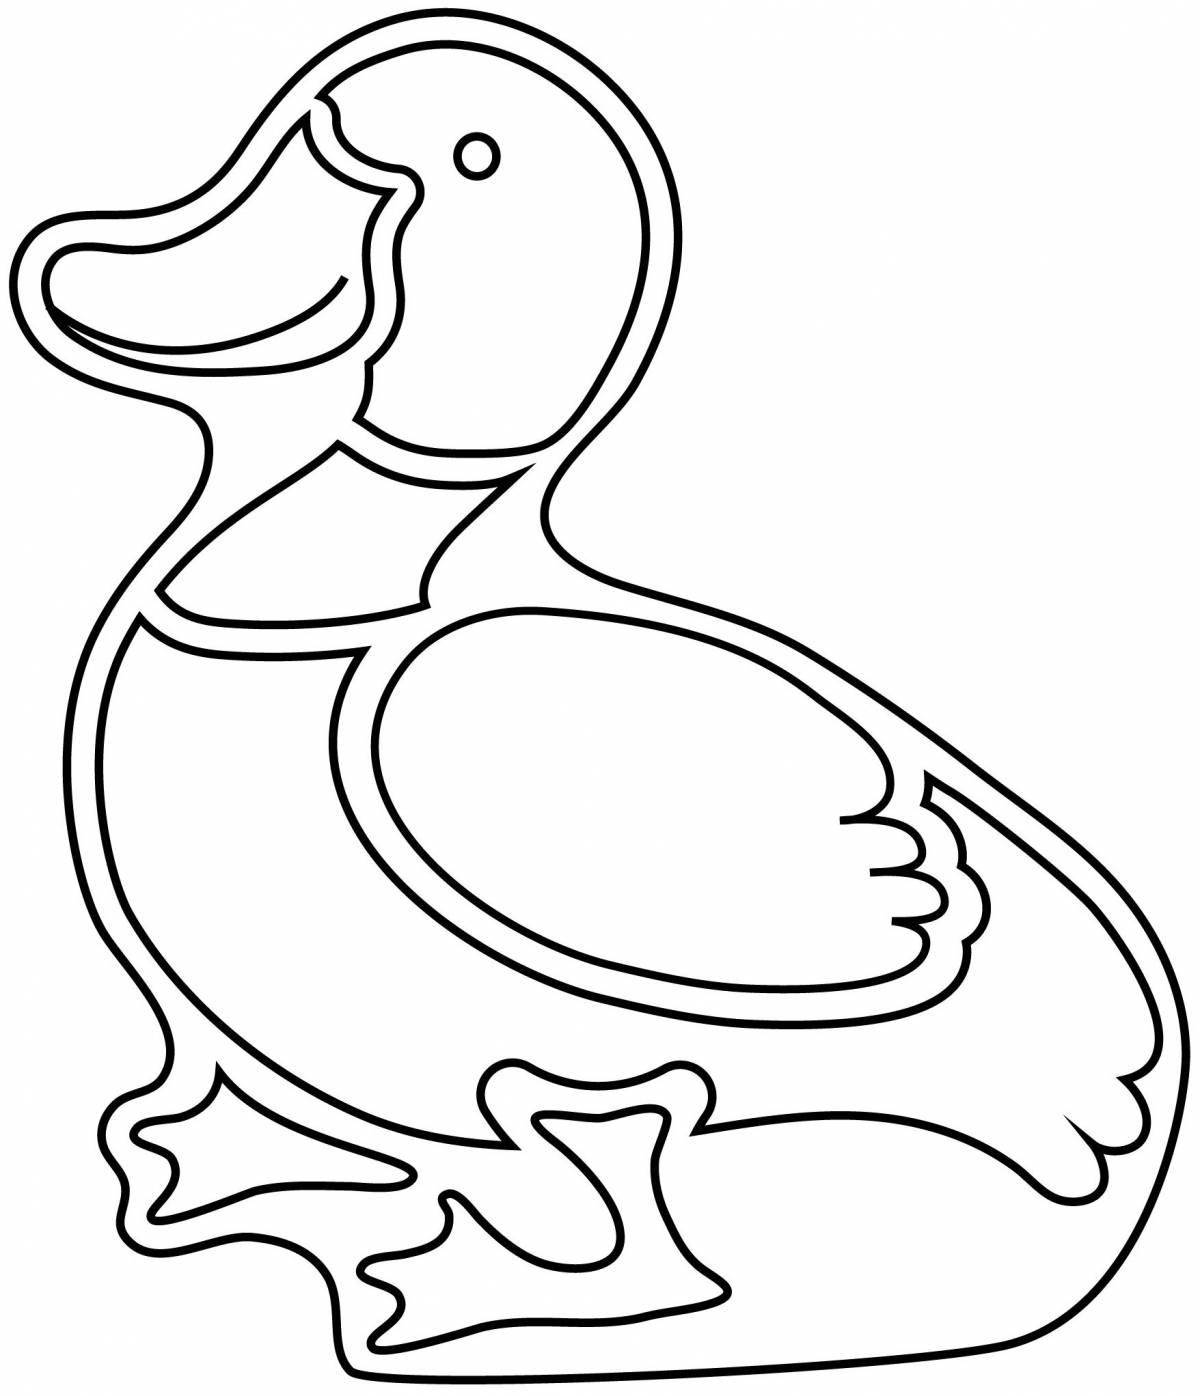 Coloring duck with color splashes for children 3-4 years old